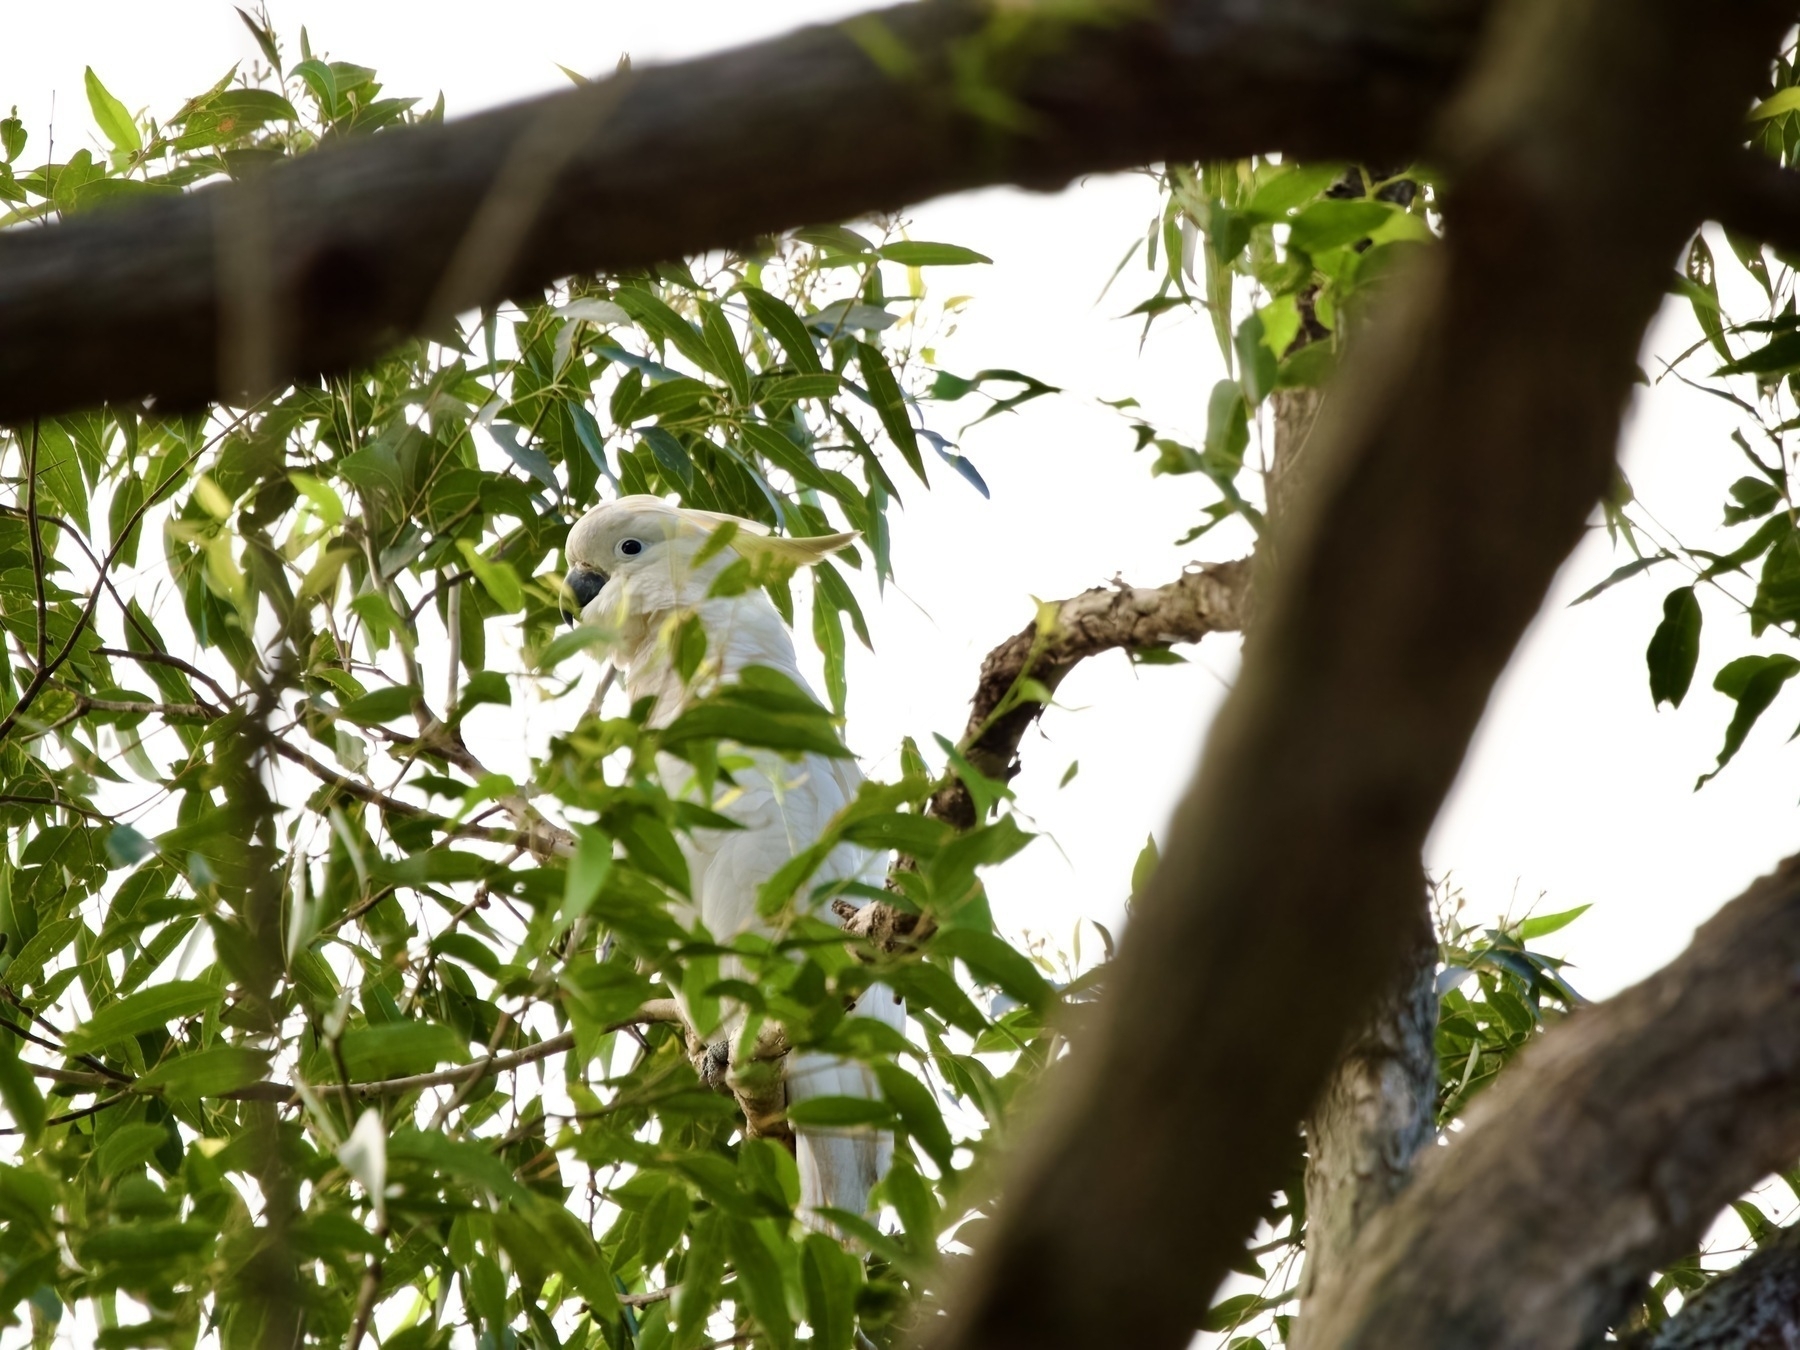 Peering through branches at a sulphur-crested cockatoo, perched high up a tree